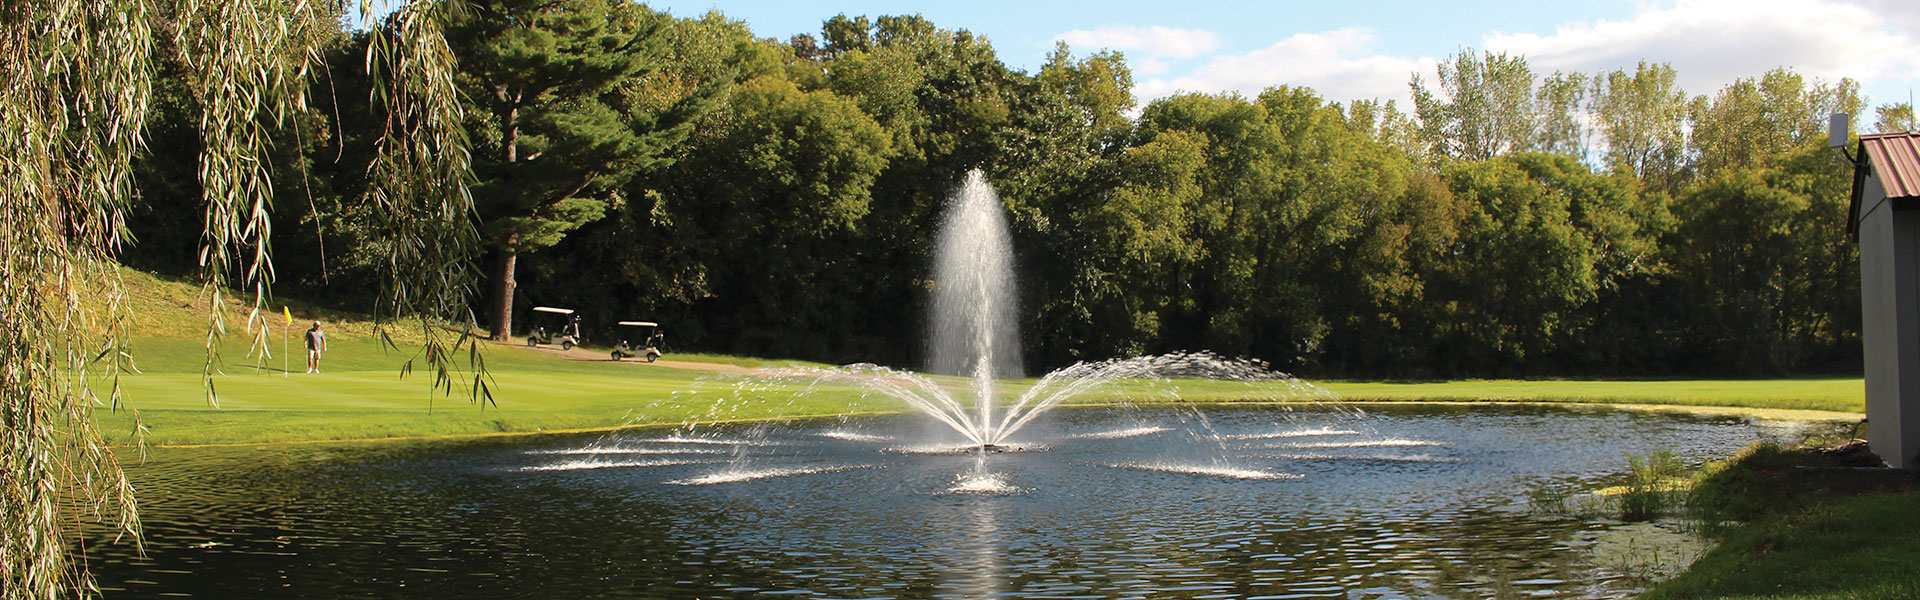 Premium Nozzles for Pond and Lake Fountains from Kasco Marine